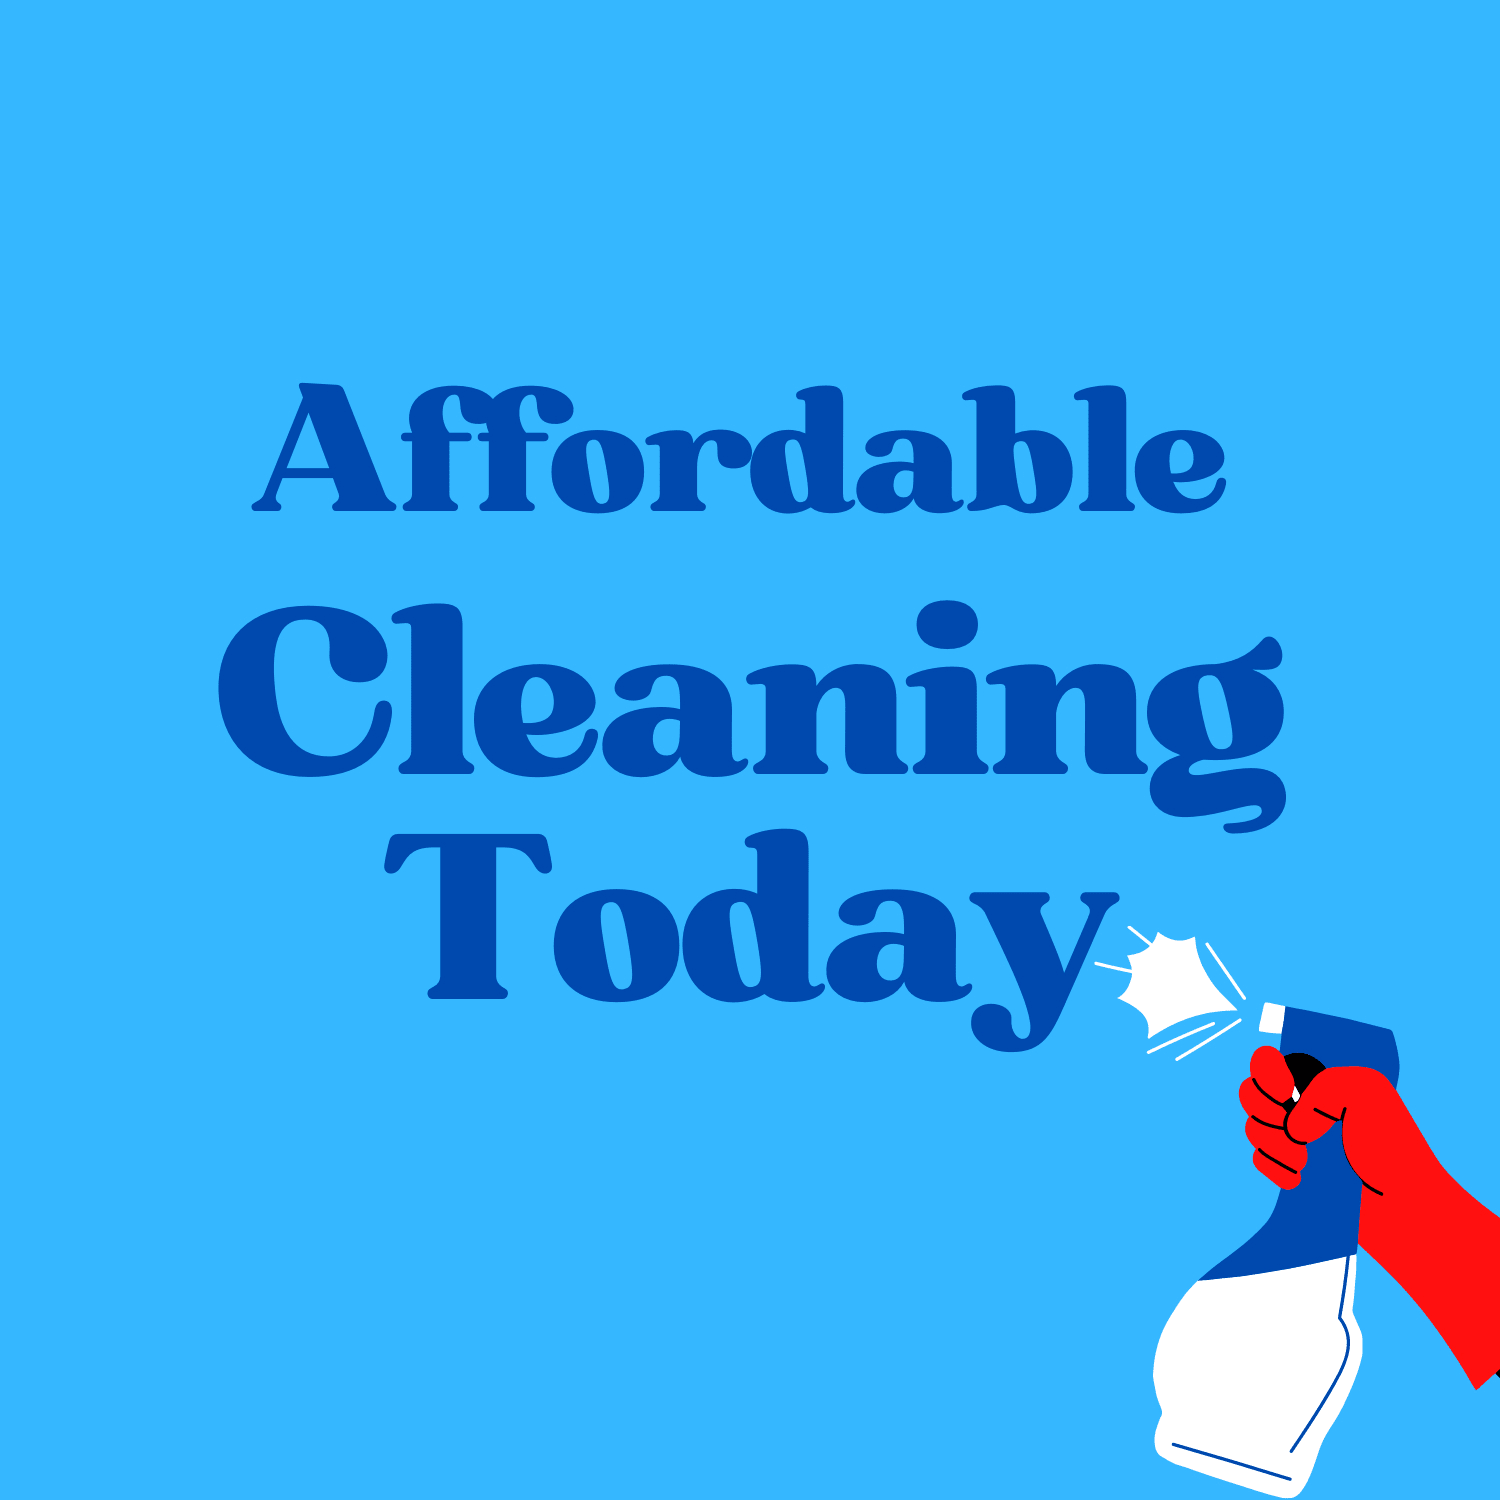 Affordable Cleaning Near Me – Affordable Cleaning Today